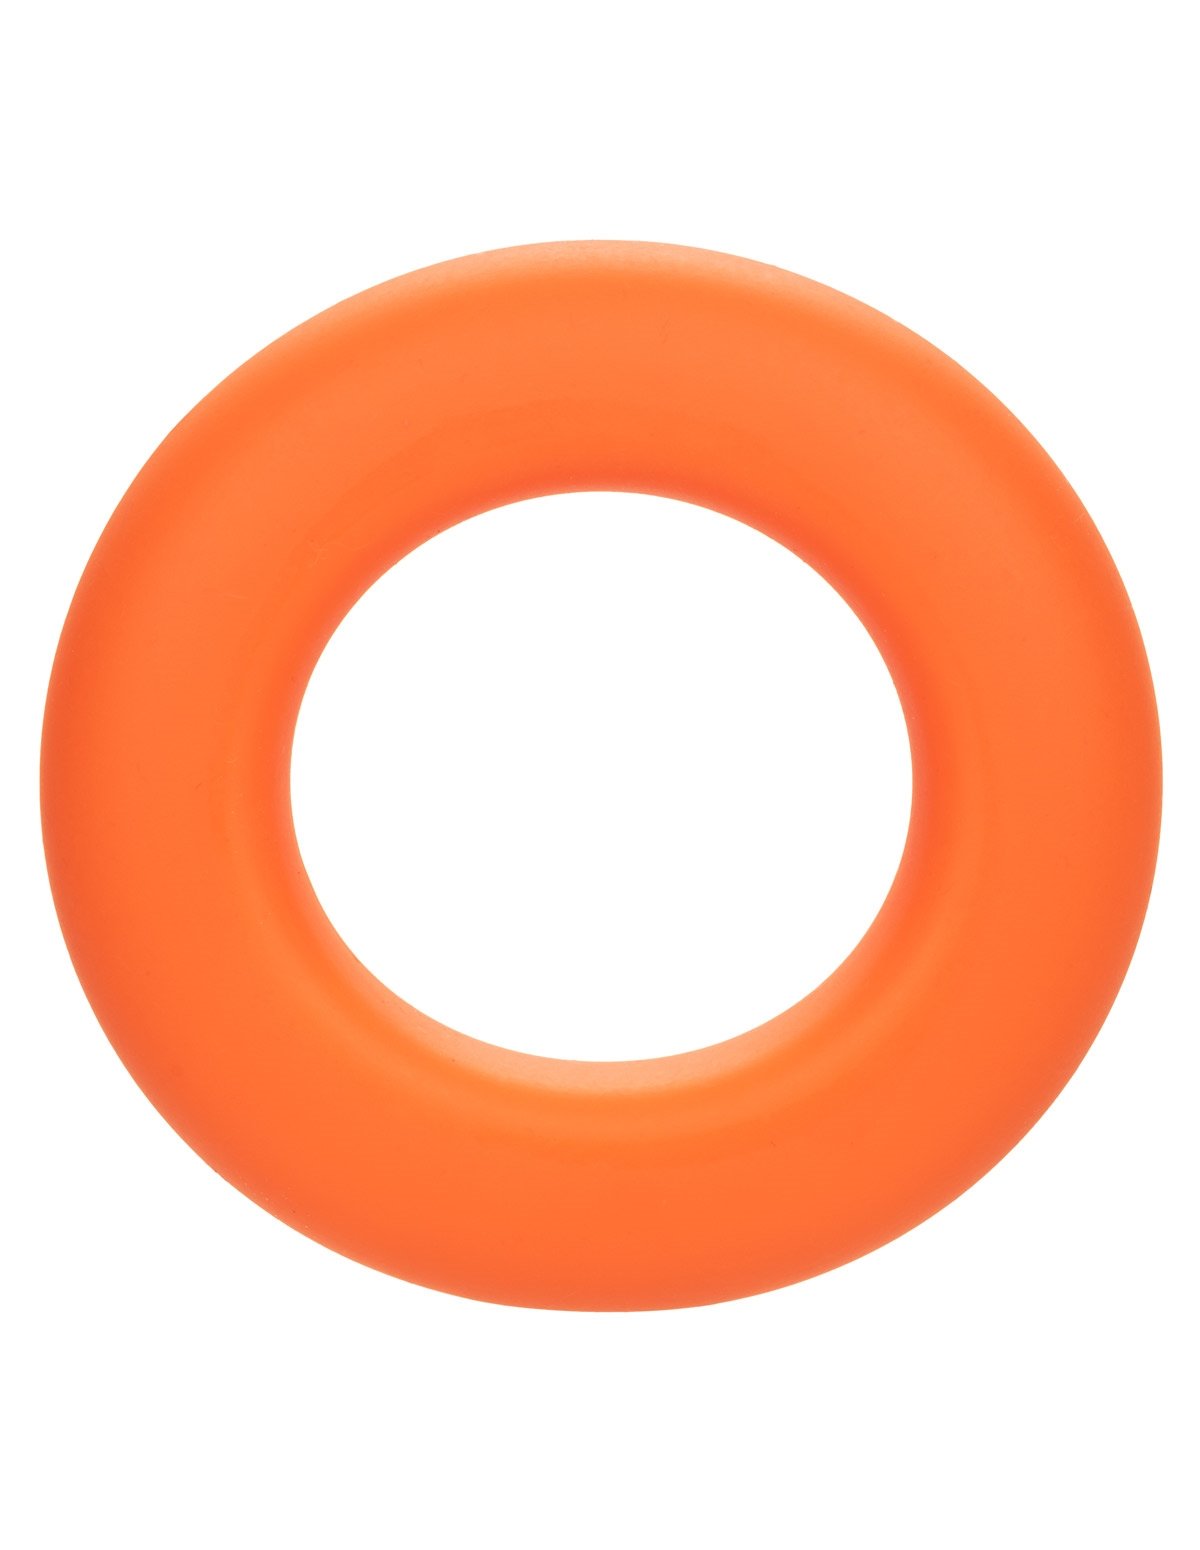 alternate image for Alpha Silicone Prolong Large C-Ring